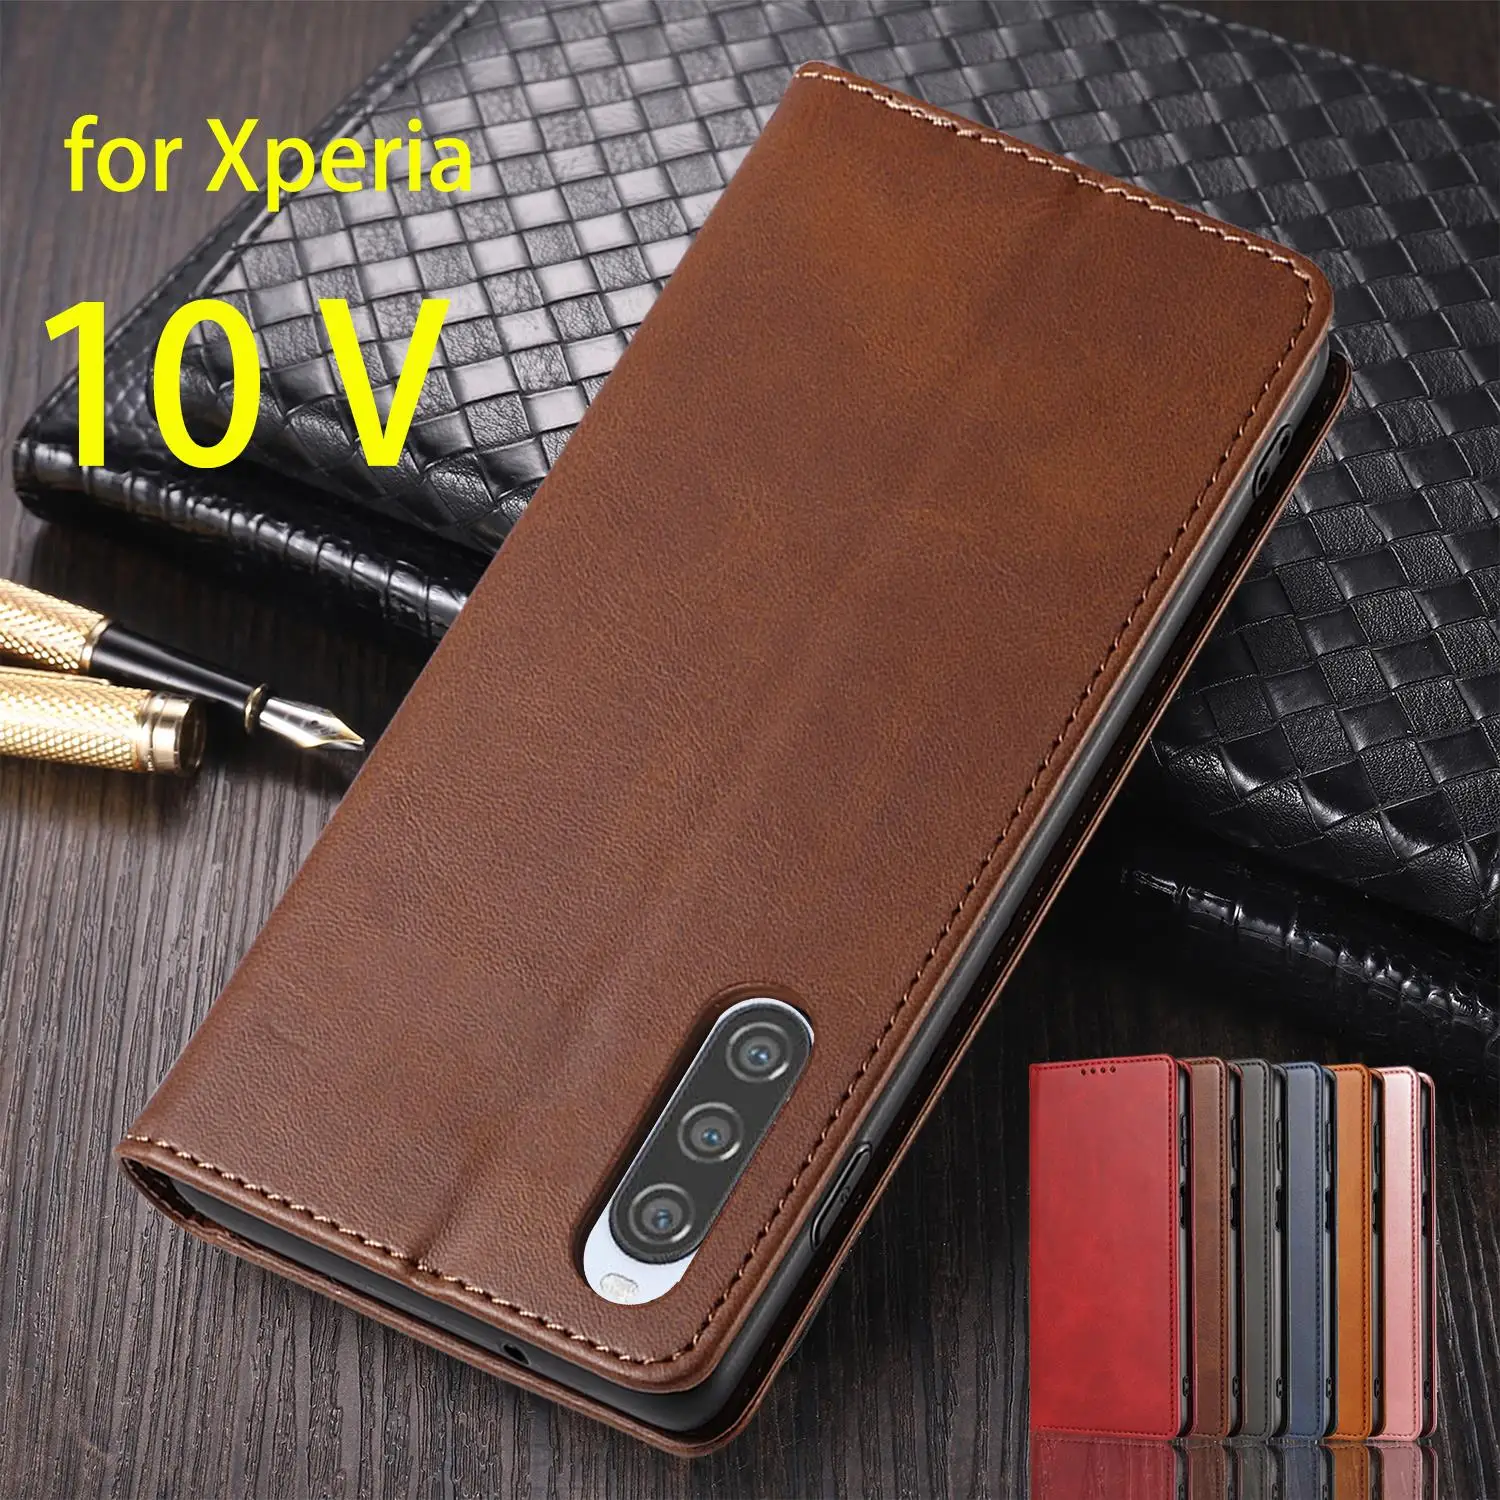 

Leather Case for Sony Xperia 10 V Flip Case Card Holder Holster Magnetic Attraction Cover Wallet Case Fundas Coque